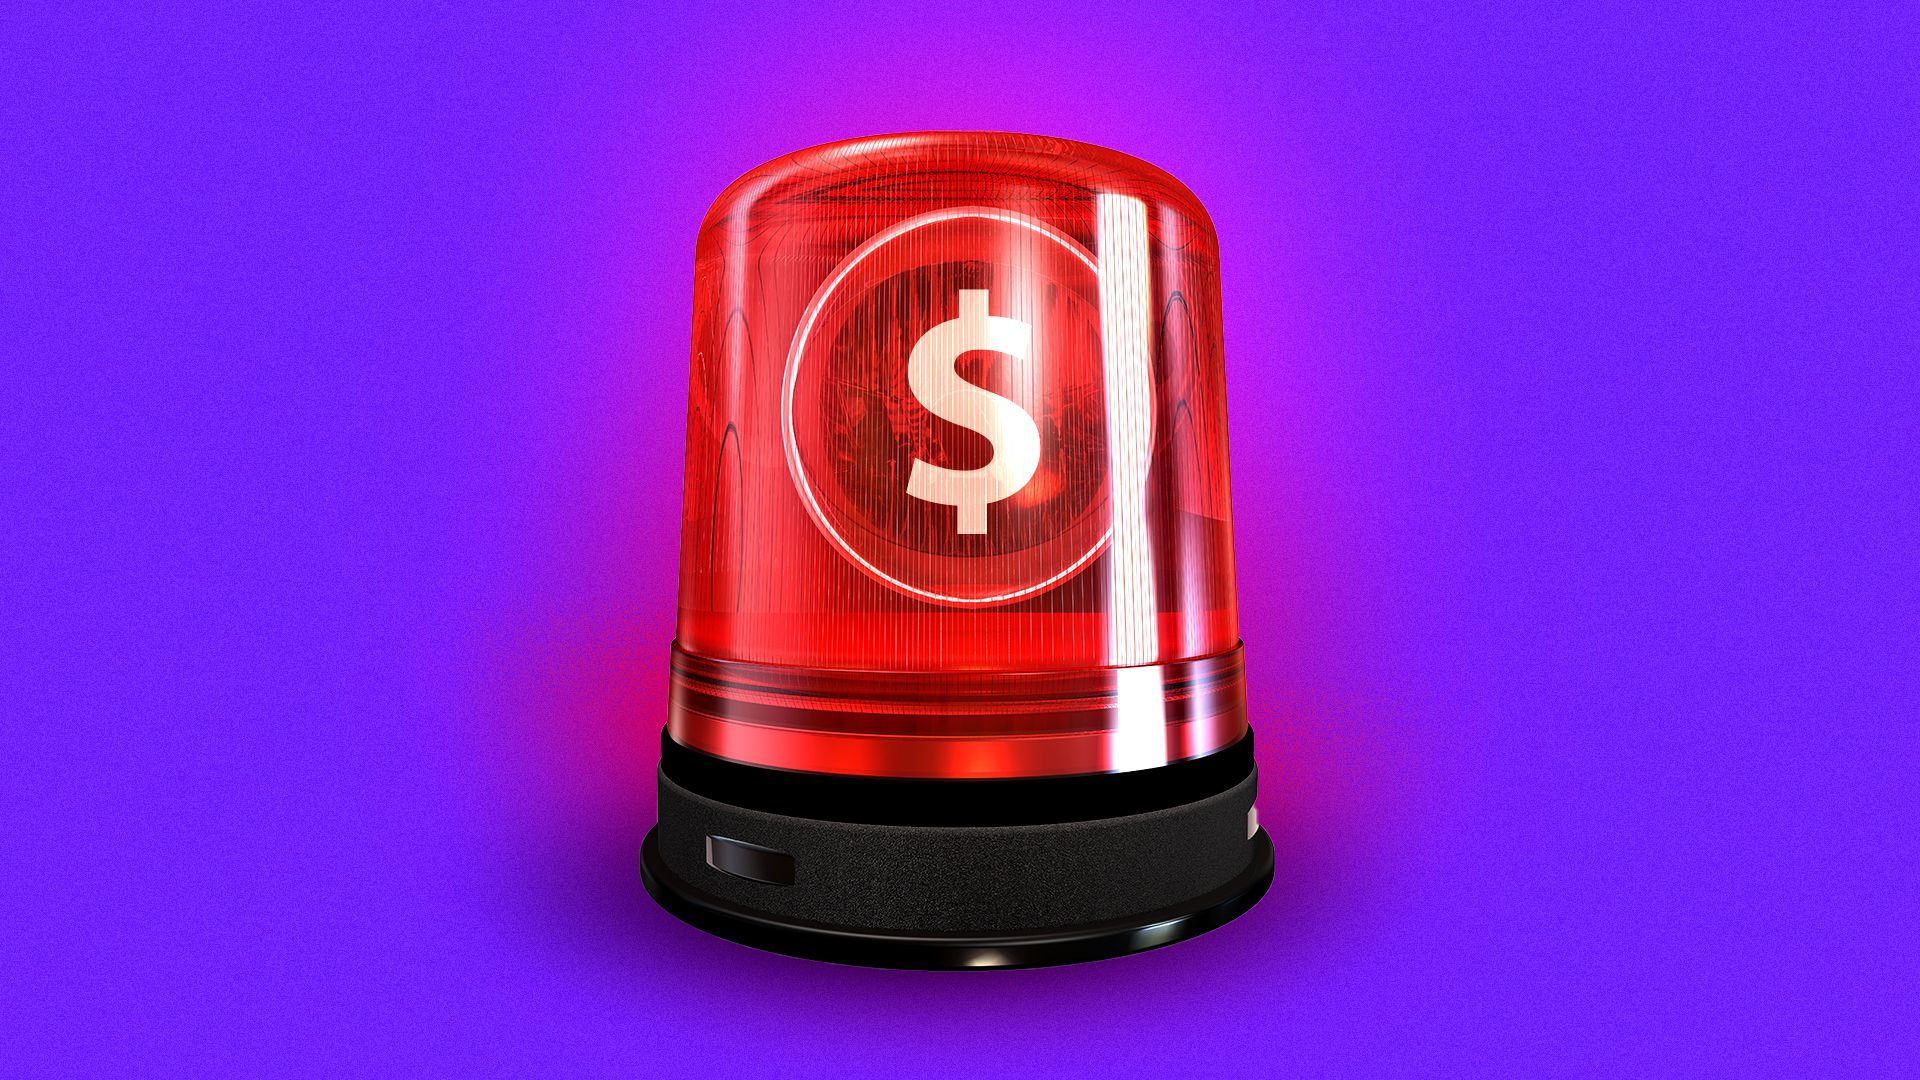 Illustration of a red siren with a dollar sign on it.